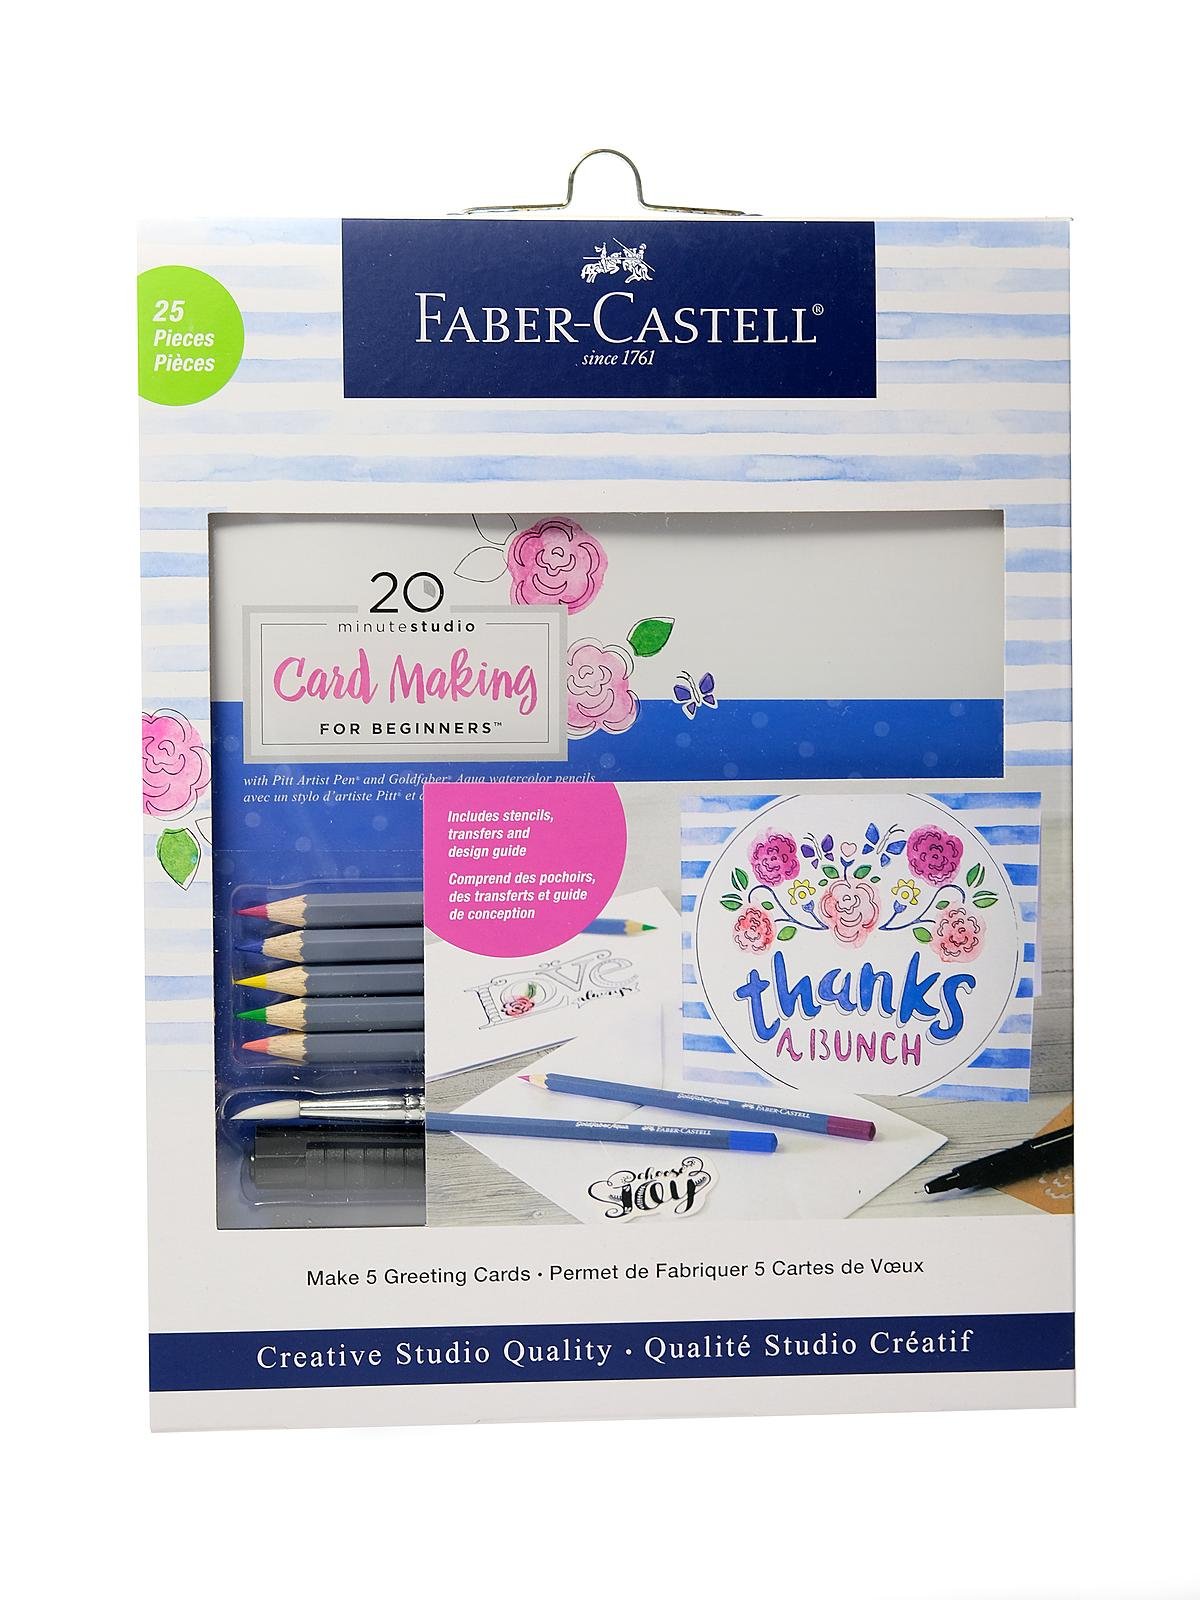 Faber-Castell - 20 Minute Studio Card Making for Beginners